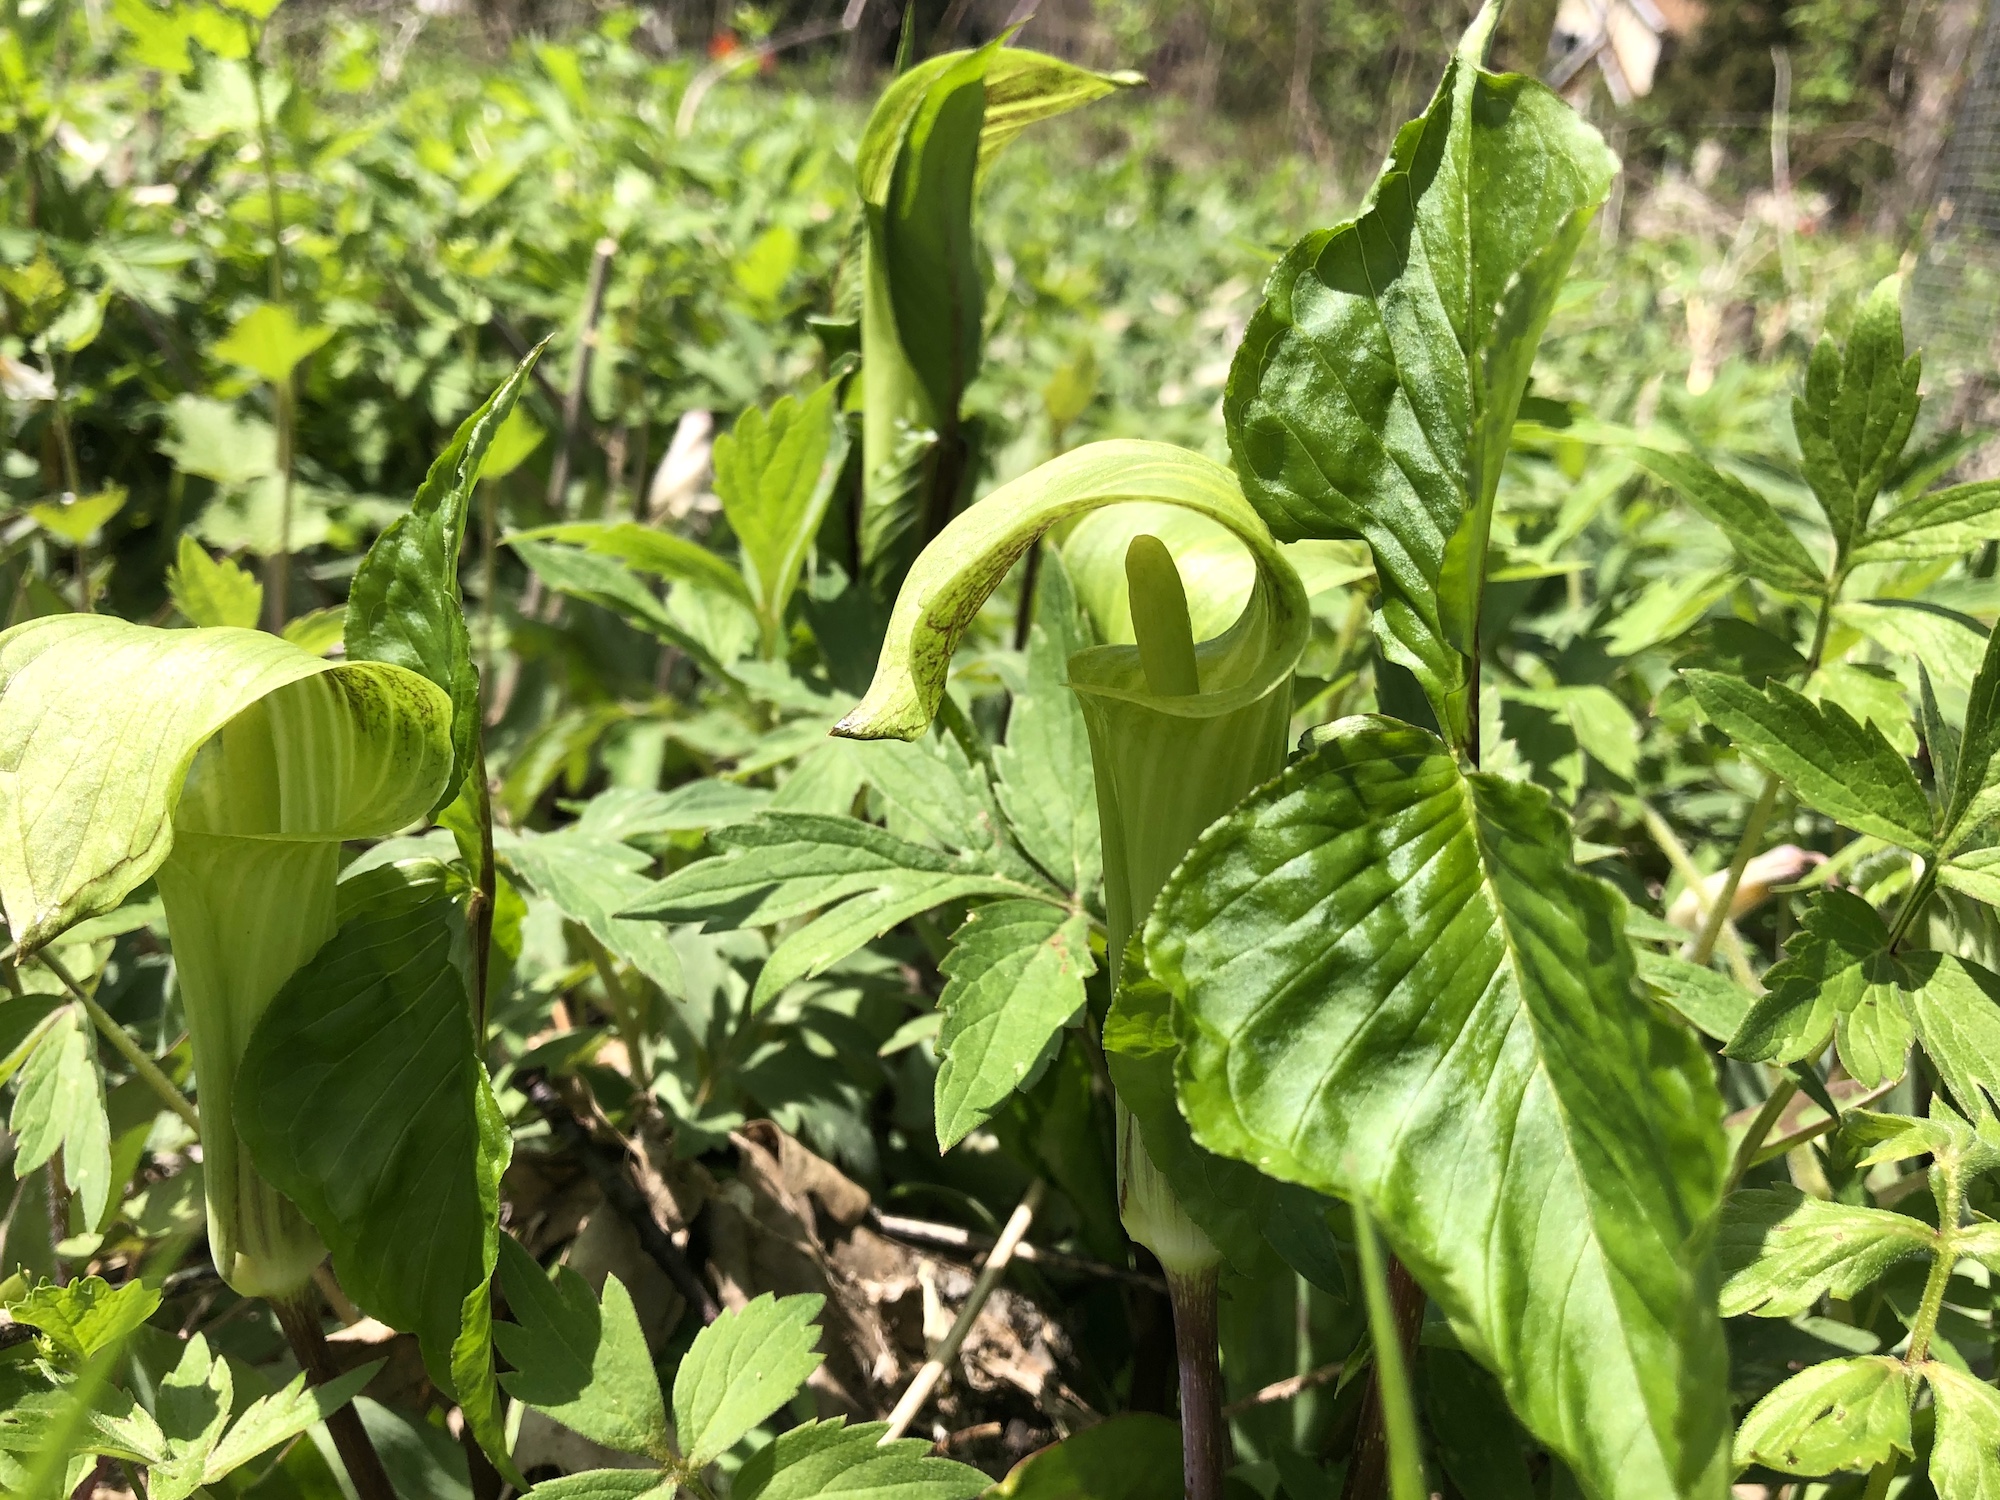 Jack-in-the-pulpit in the Oak Savanna on May 3, 2020.